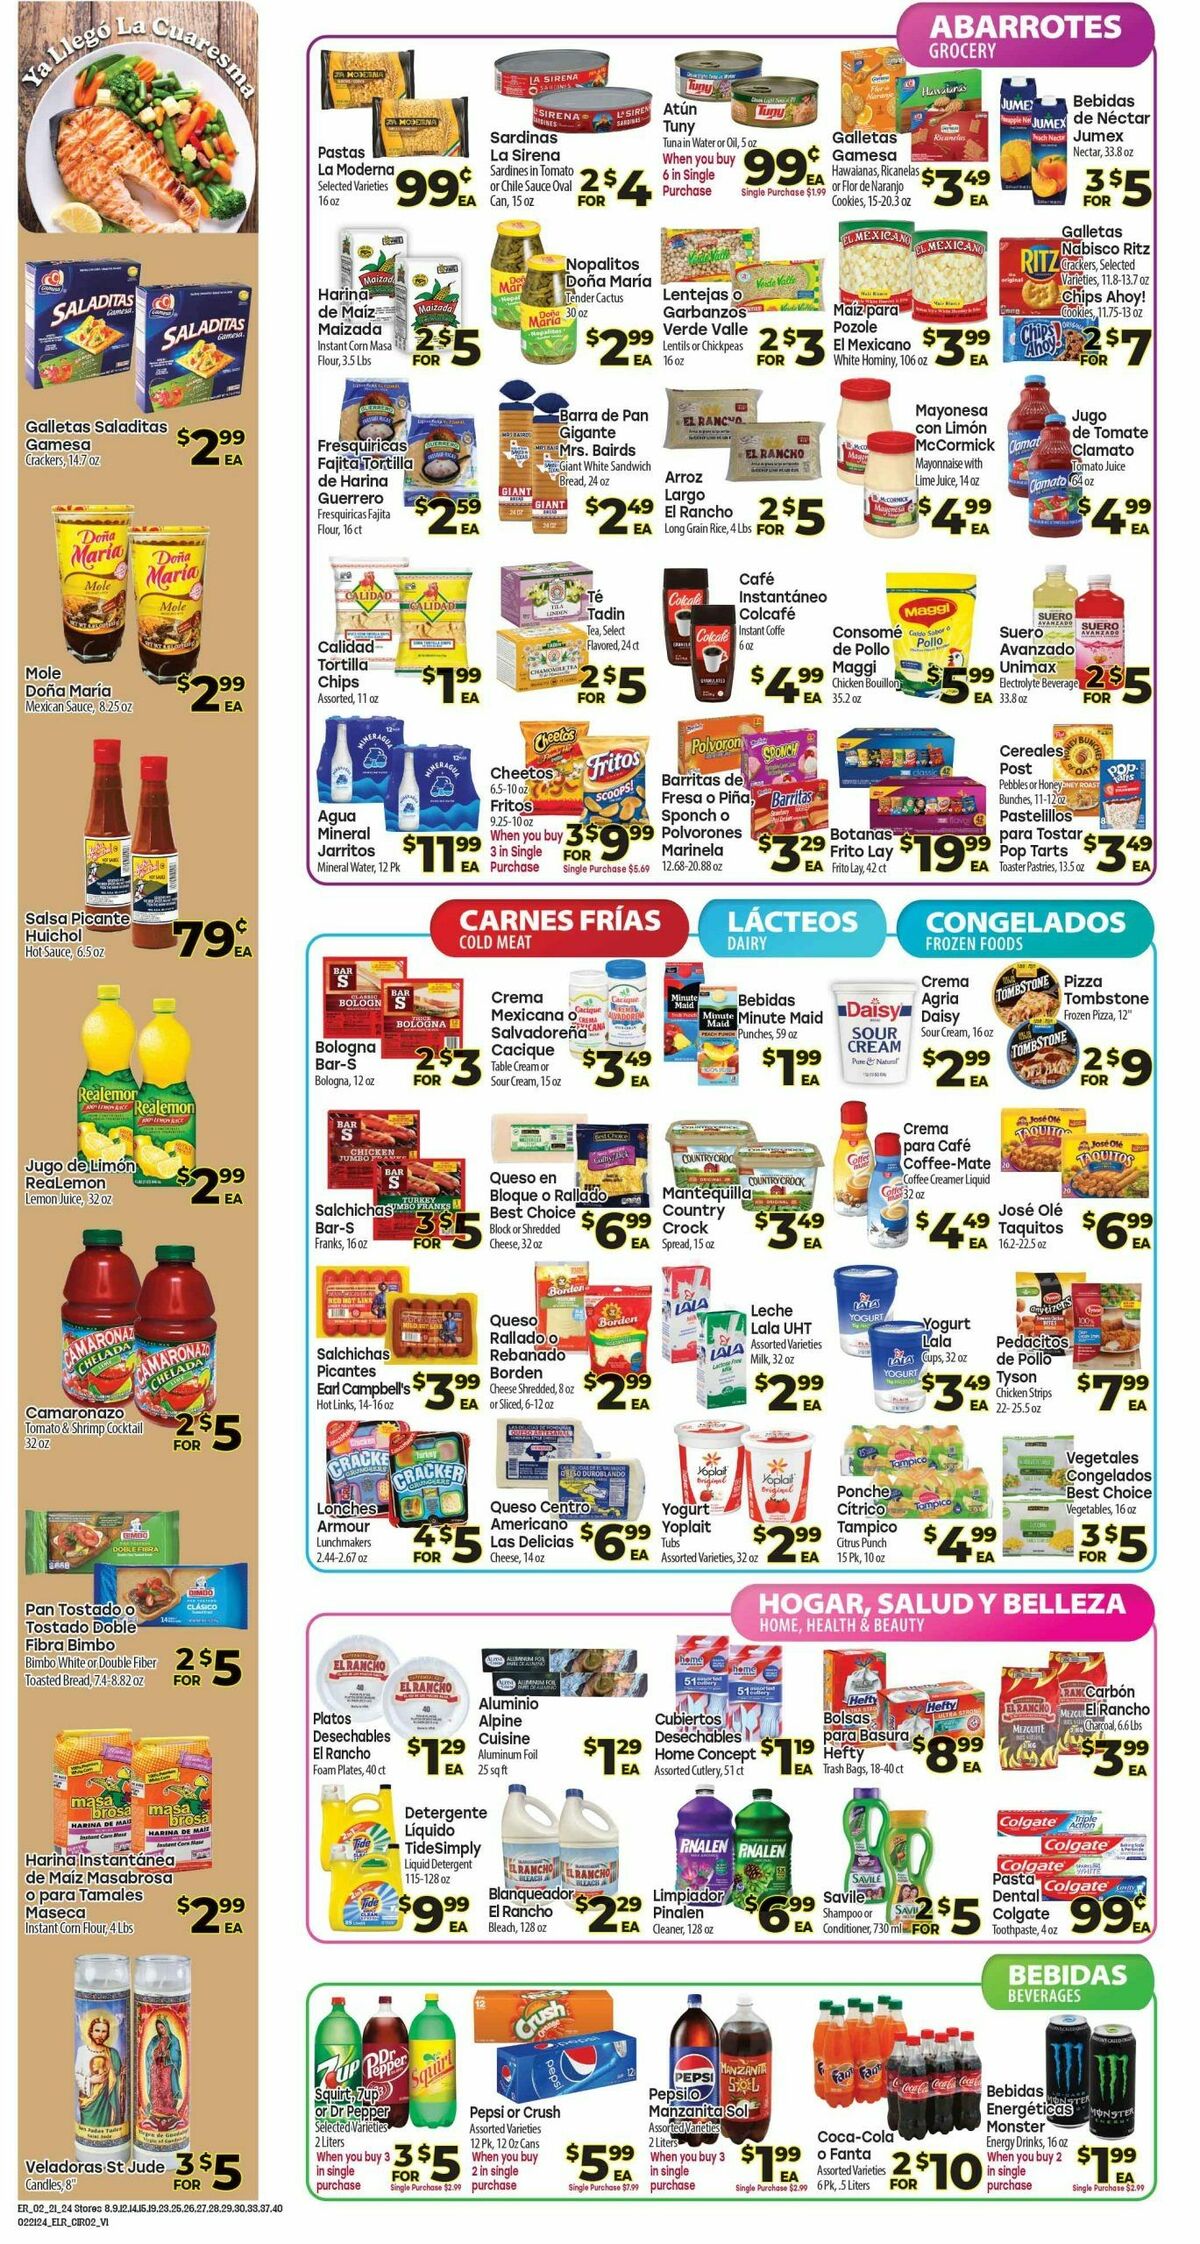 El Rancho Weekly Ad from February 21